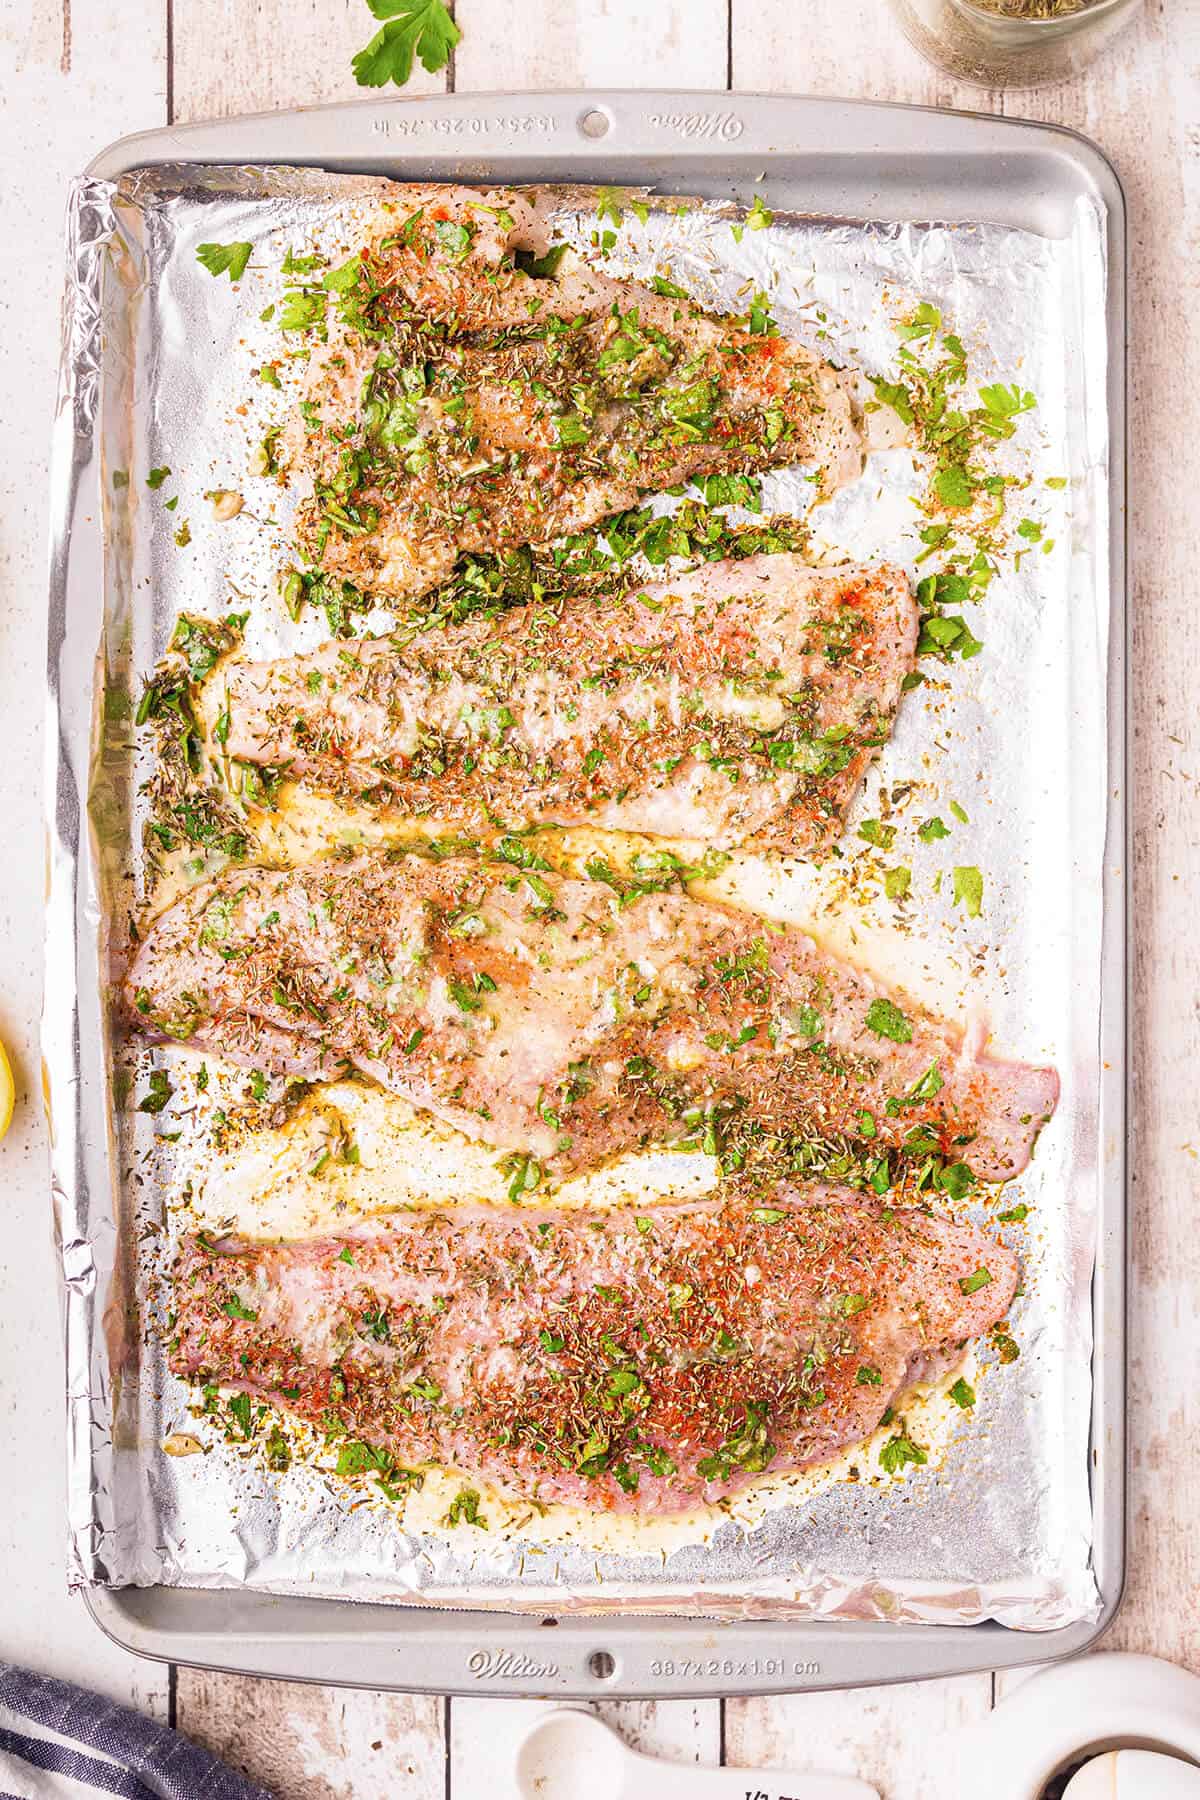 Seasoned catfish fillets on foil-lined pan drizzled with lemon-butter mixture.